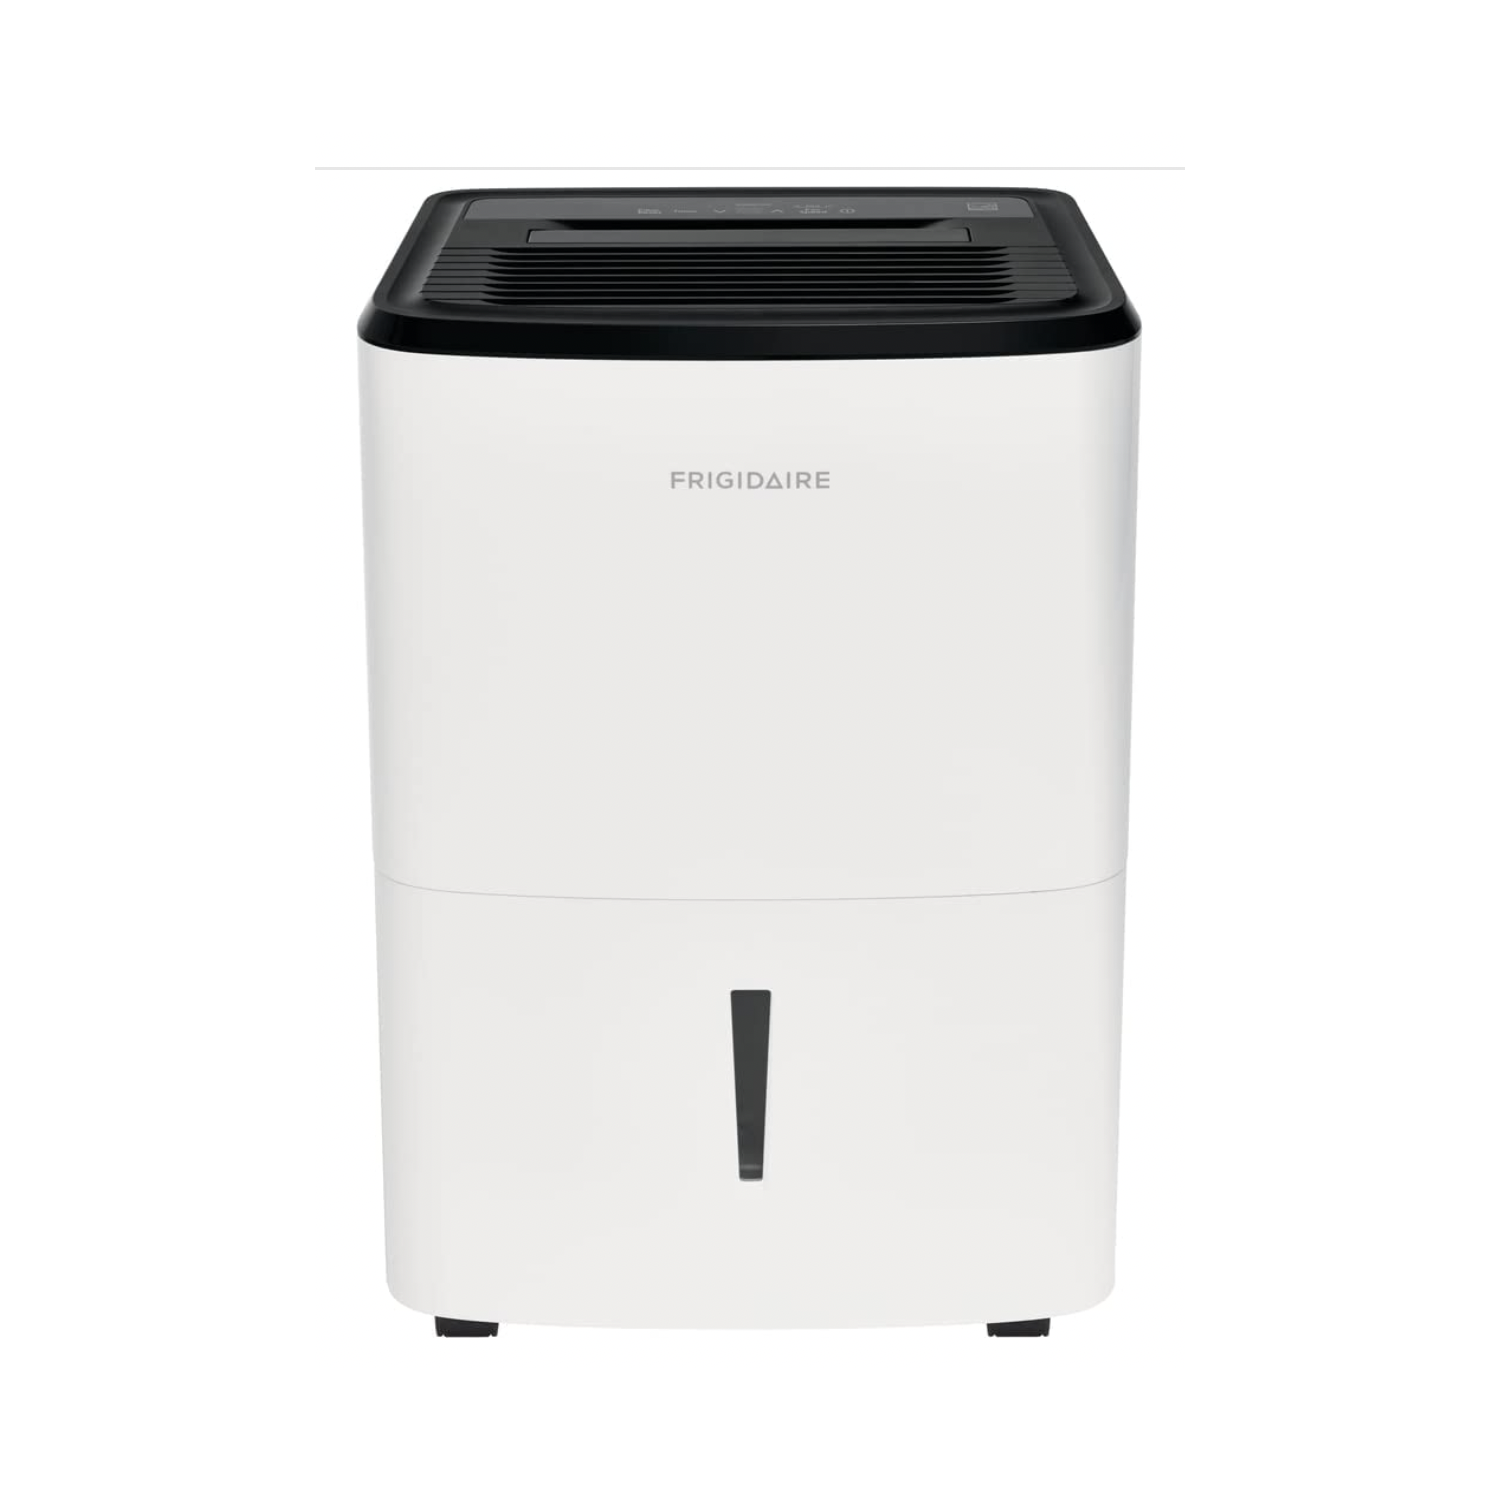 Frigidaire 50 pt. Dehumidifier, for High Humidity with a Easy-to-Clean Washable Filter and Custom Humidity Control for maximized comfort, in White - (FFAD5033W1)